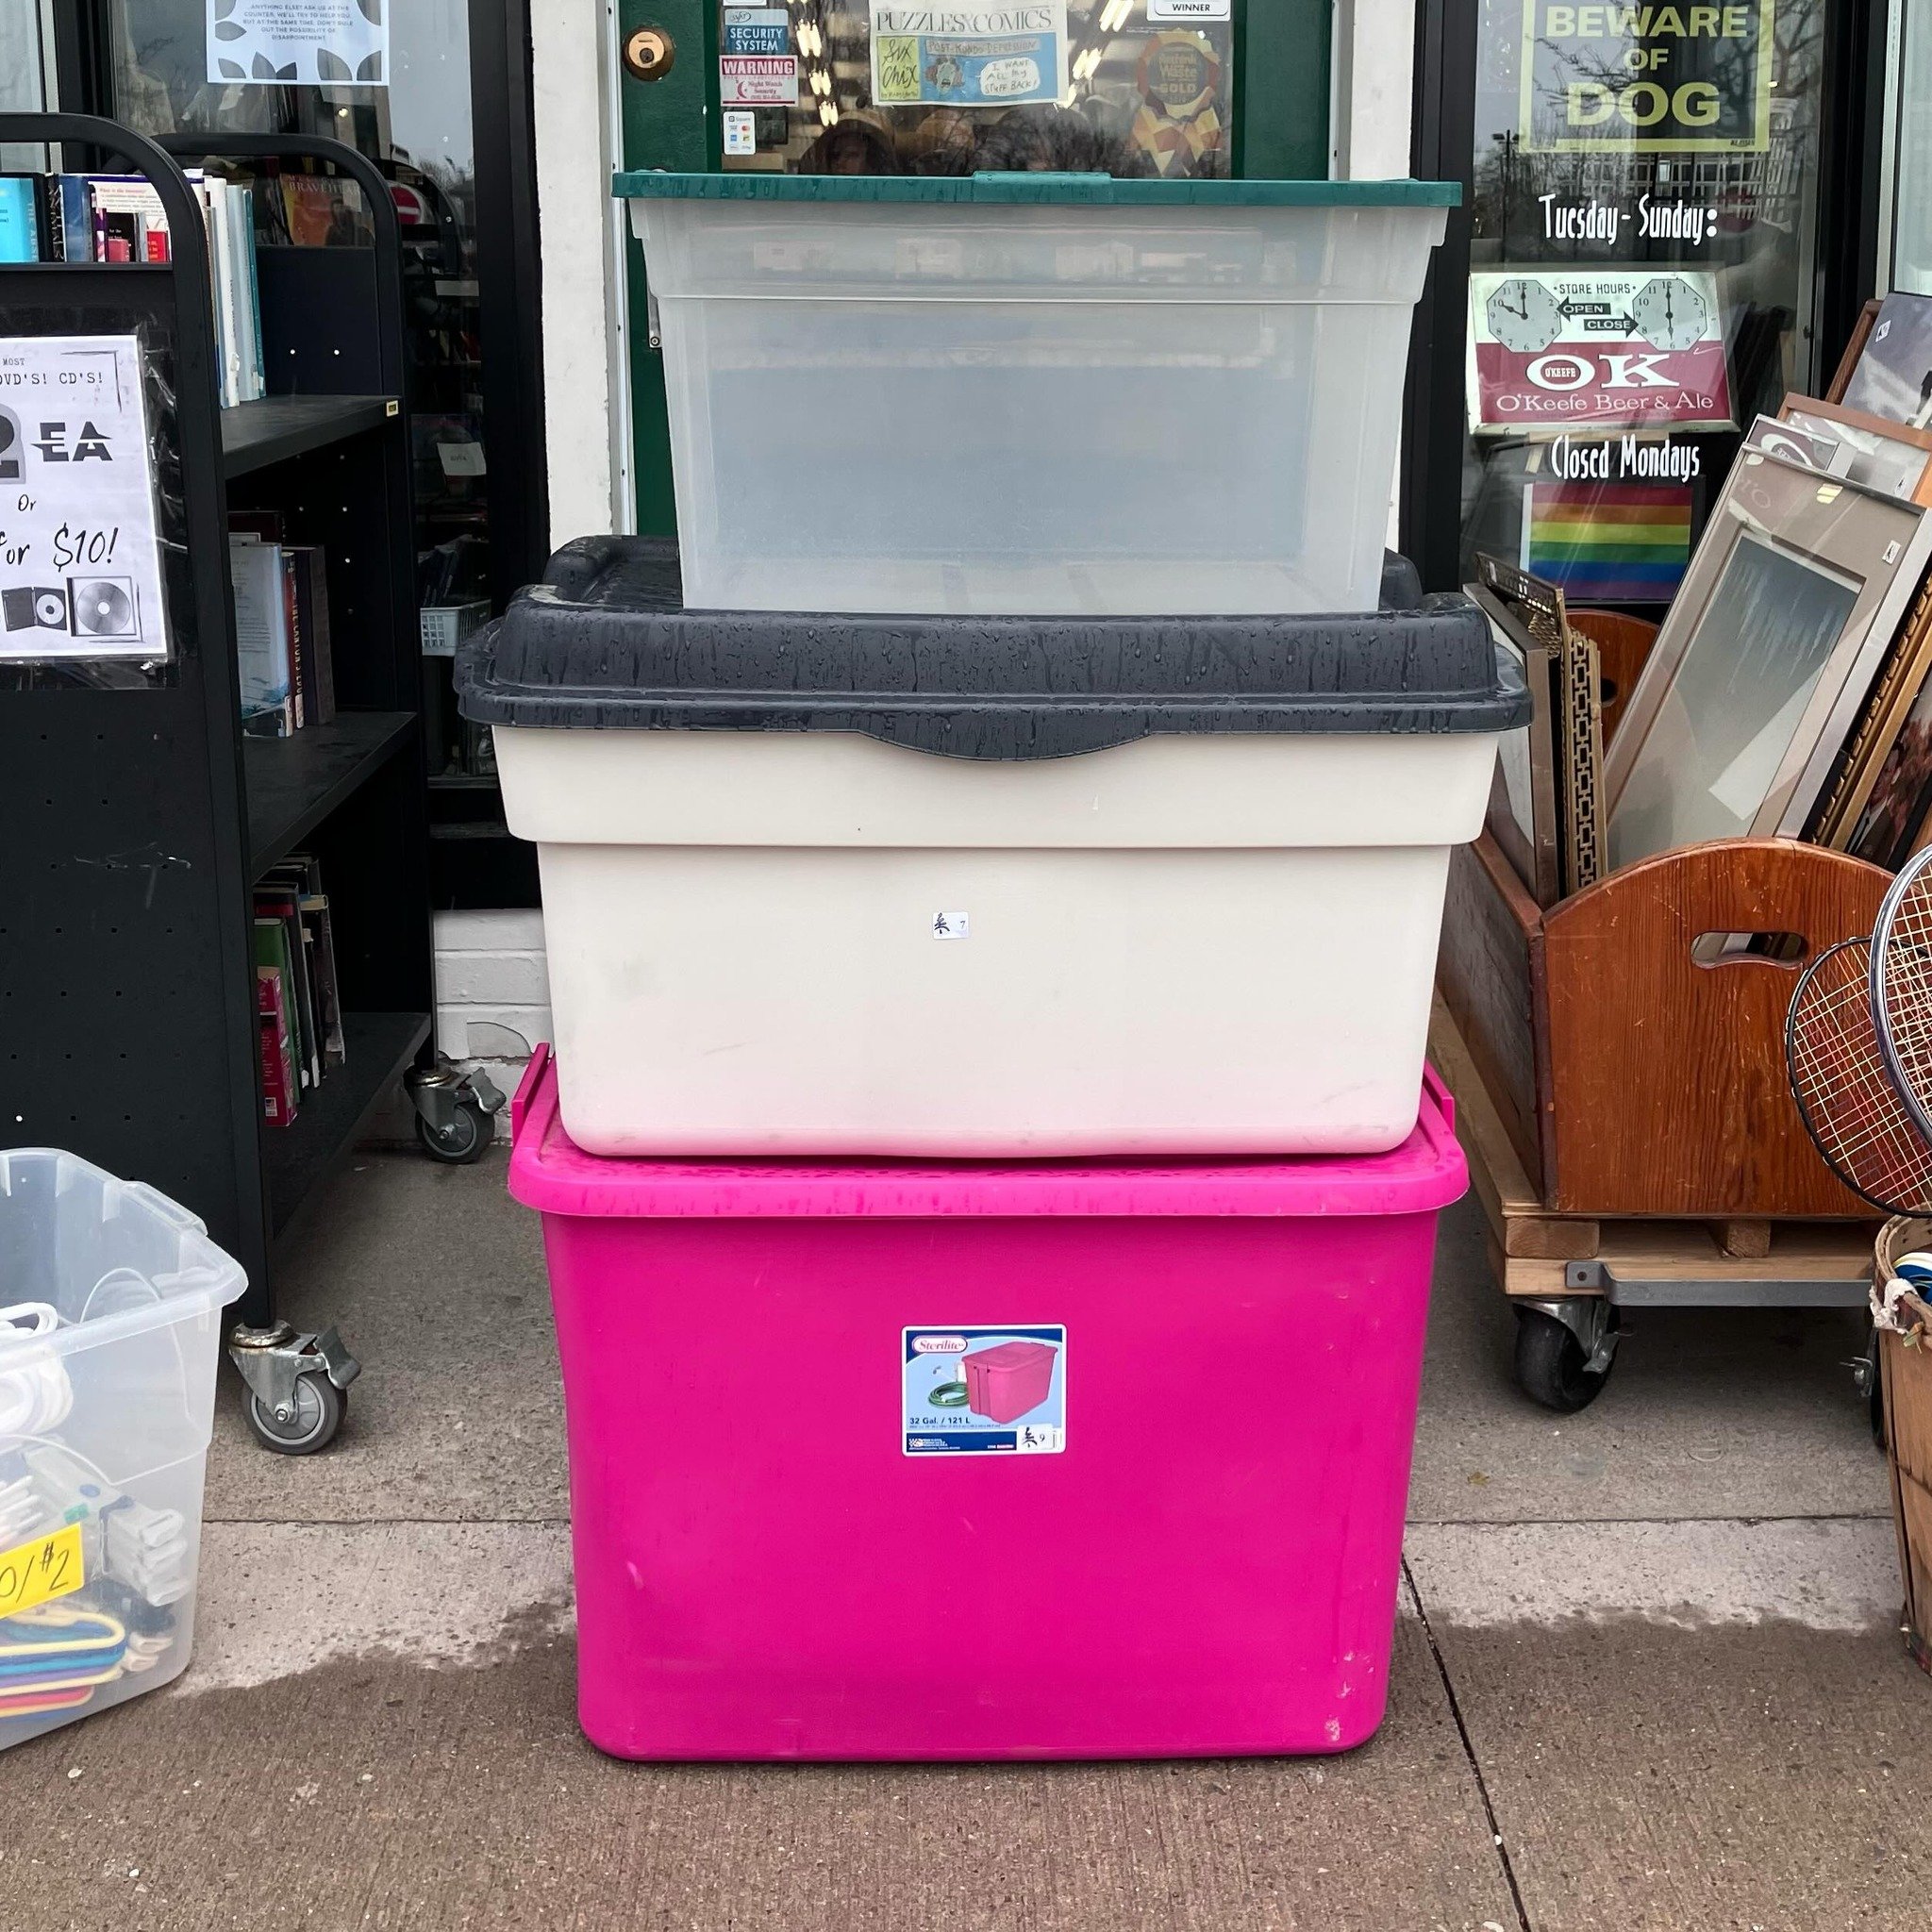 A rainy day is on the docket for today. 

Most of the normal stuff we put outside the shop stays in on days like this. But it does create an opportunity for us to put out the plethora of tote bins we currently have.

Pink - $9 
Beige - $7
Clear - $5
